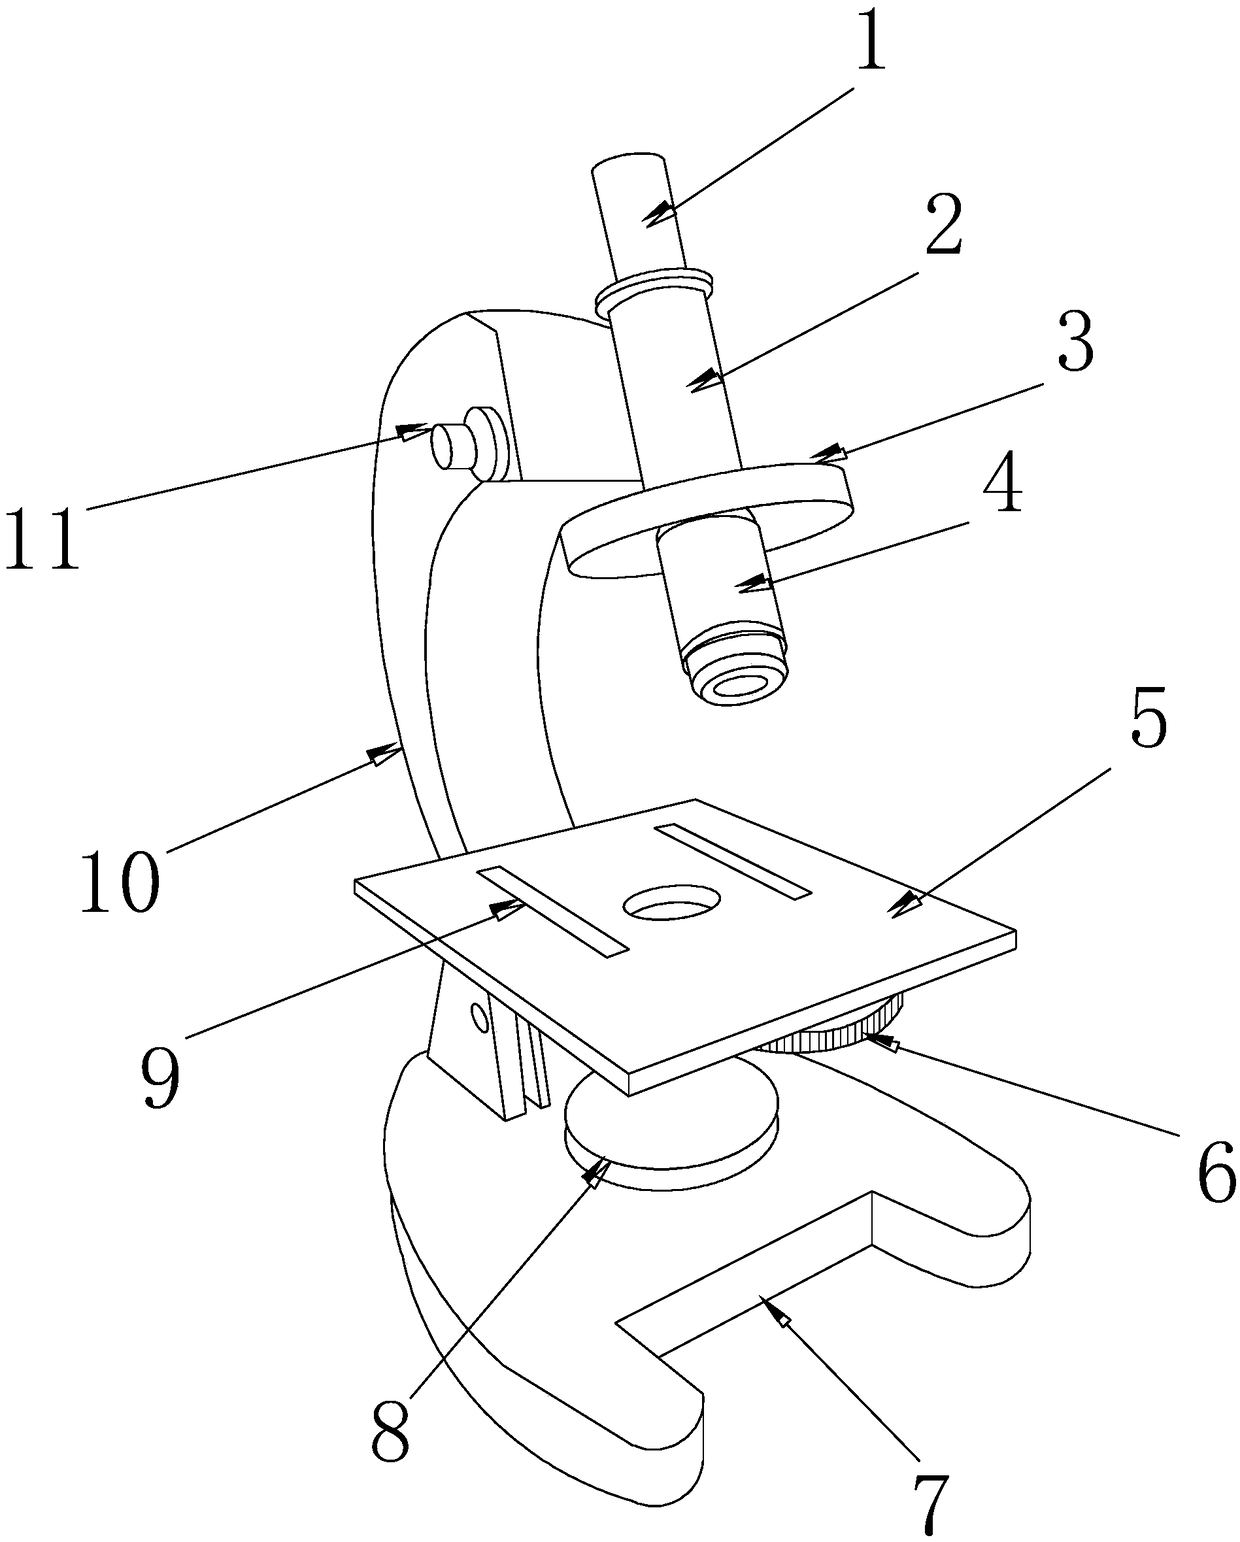 Bladder structure studying device